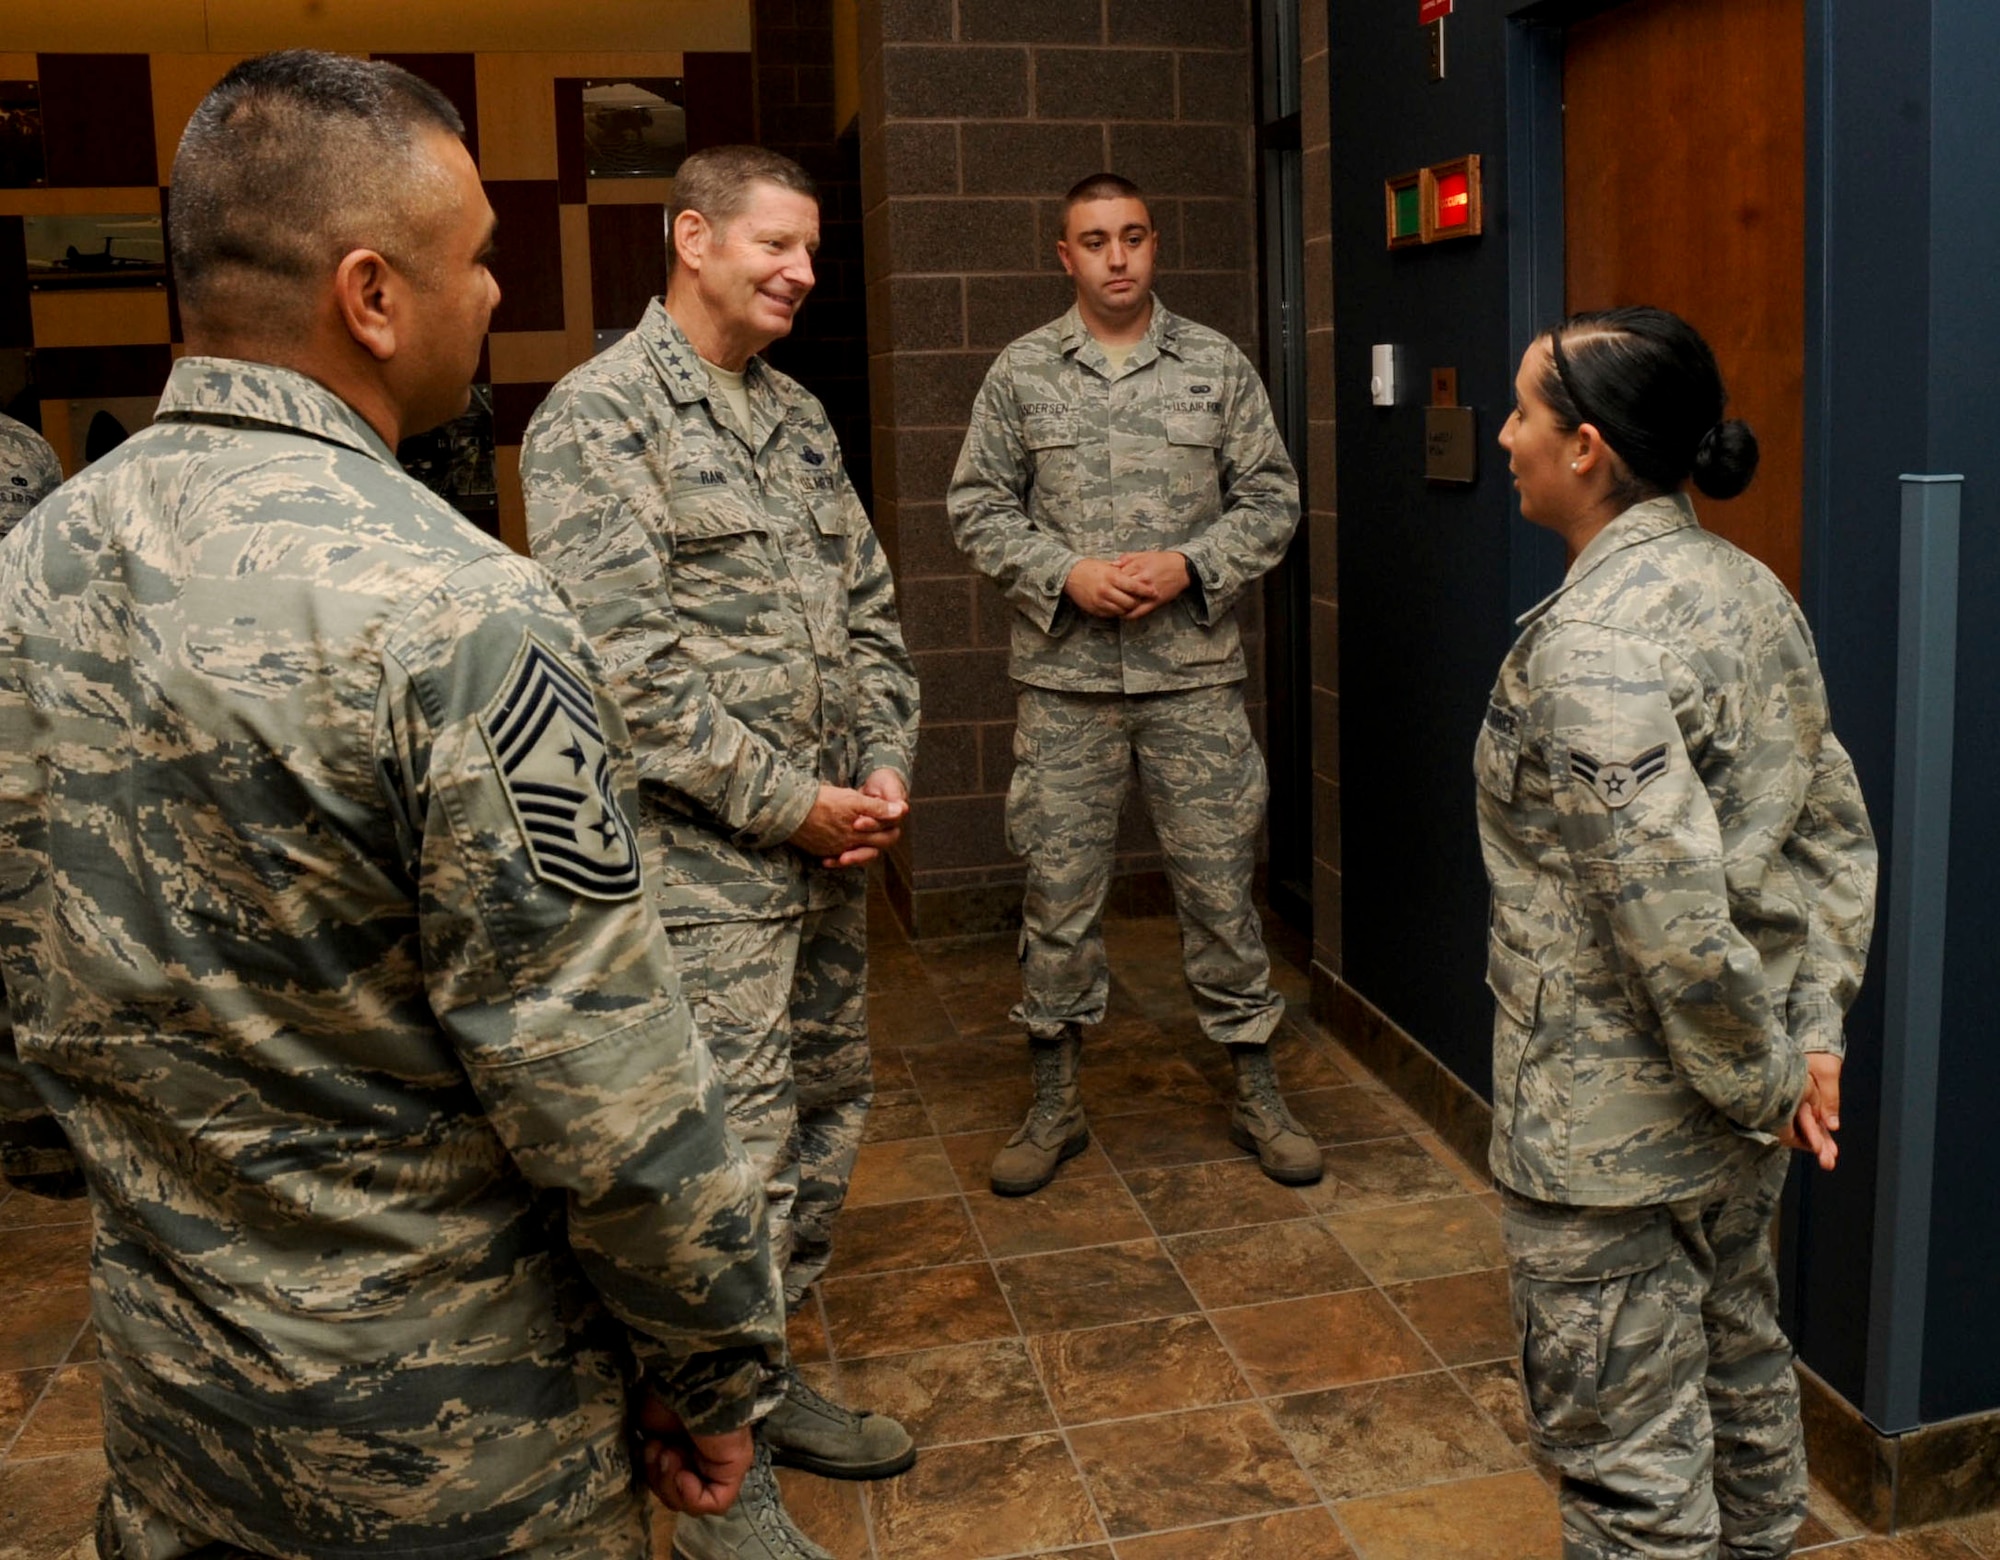 Lt. Gen. Robin Rand, 12 Air Force commander, visits the new deployment center at Ellsworth Air Force Base, S.D., July 13, 2012. The visit provided Rand an opportunity to speak with the Airmen about maintaining mission readiness. (U.S.Air Force photo by Airman 1st Class Anania Tekurio/Released) 